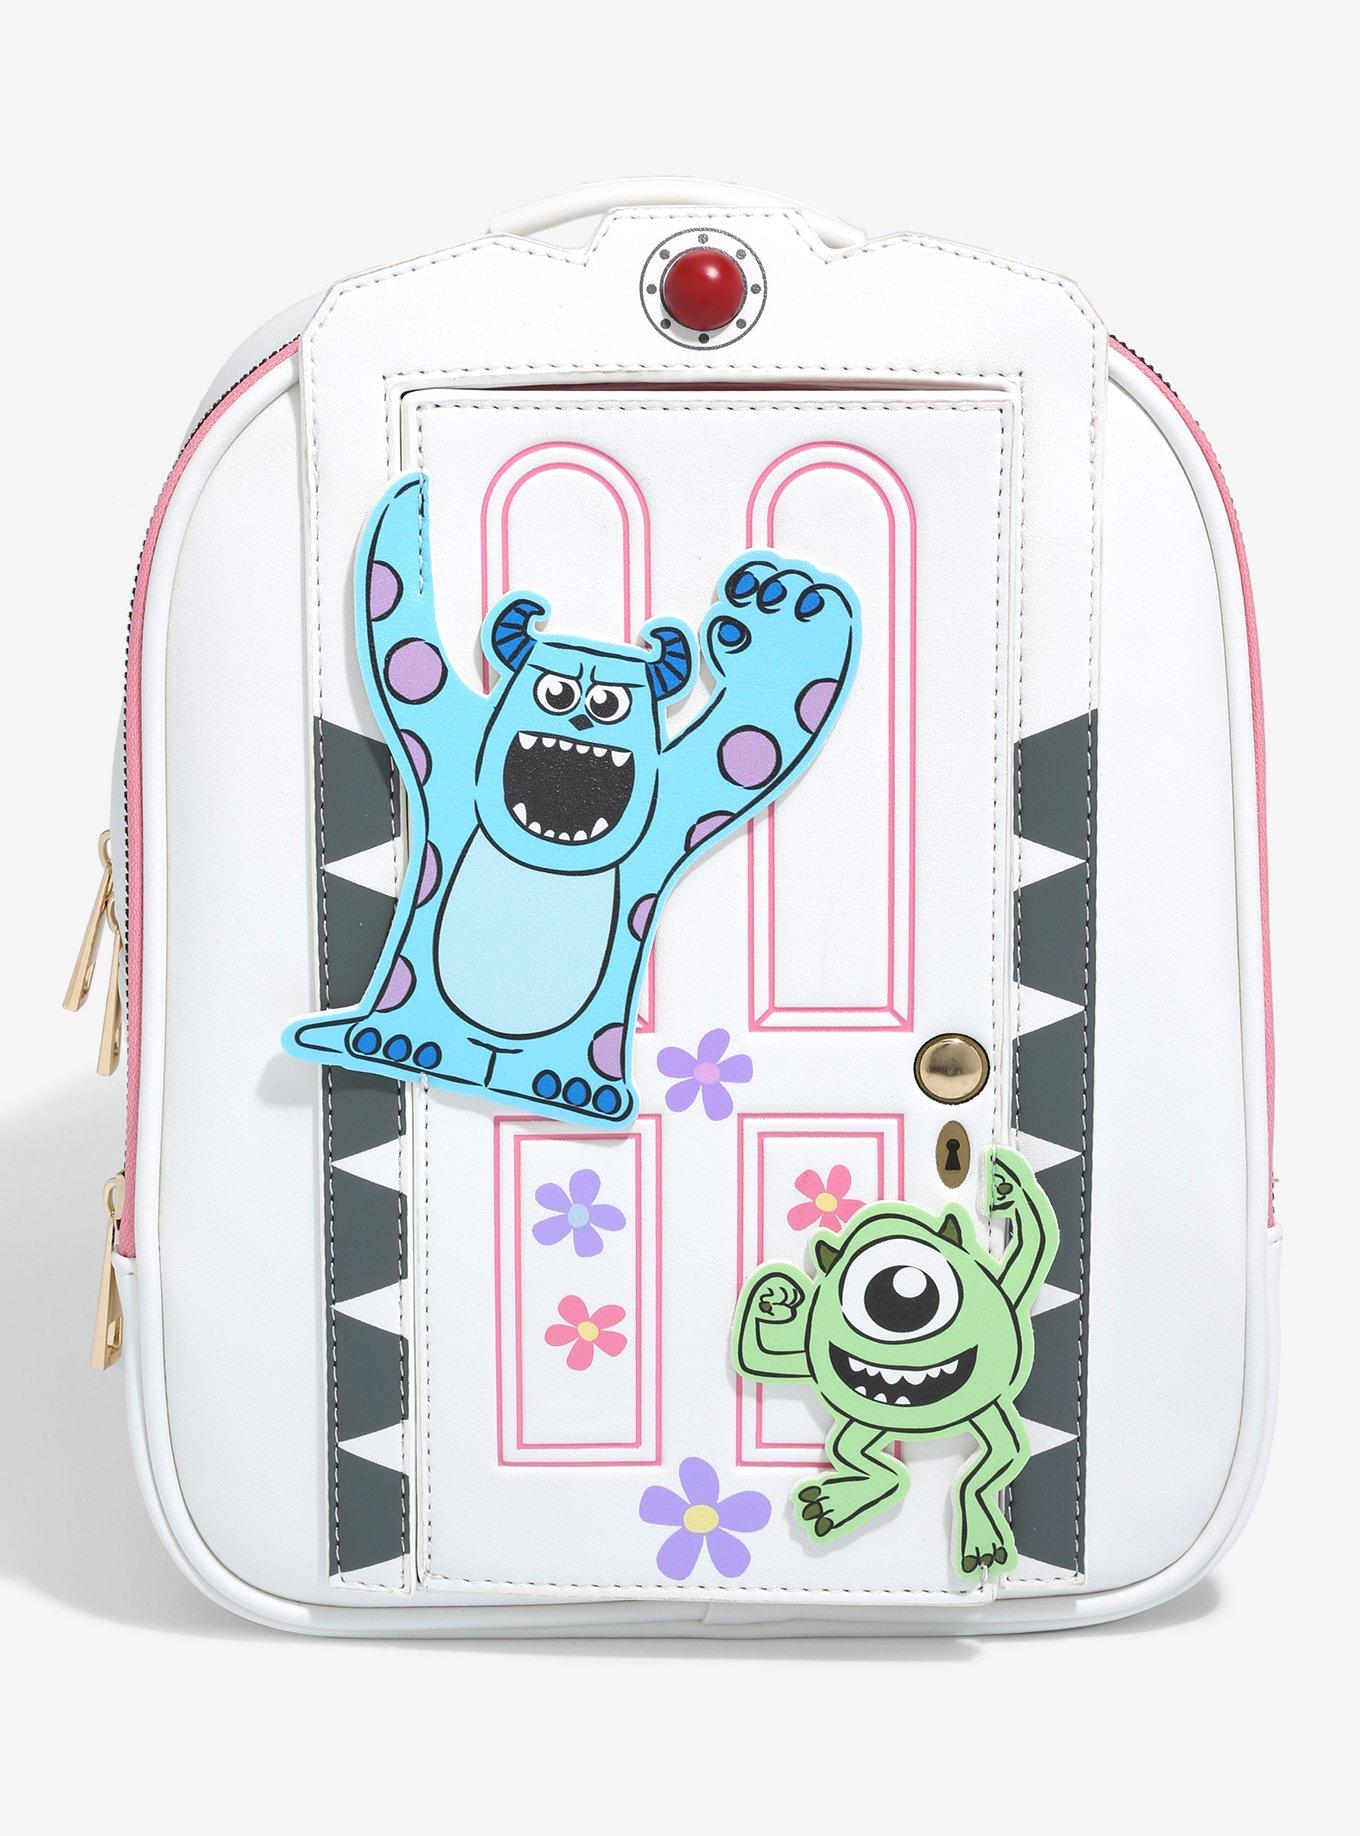 Monsters, Inc. Monsters Inc. 18 Sulley Plush Backpack